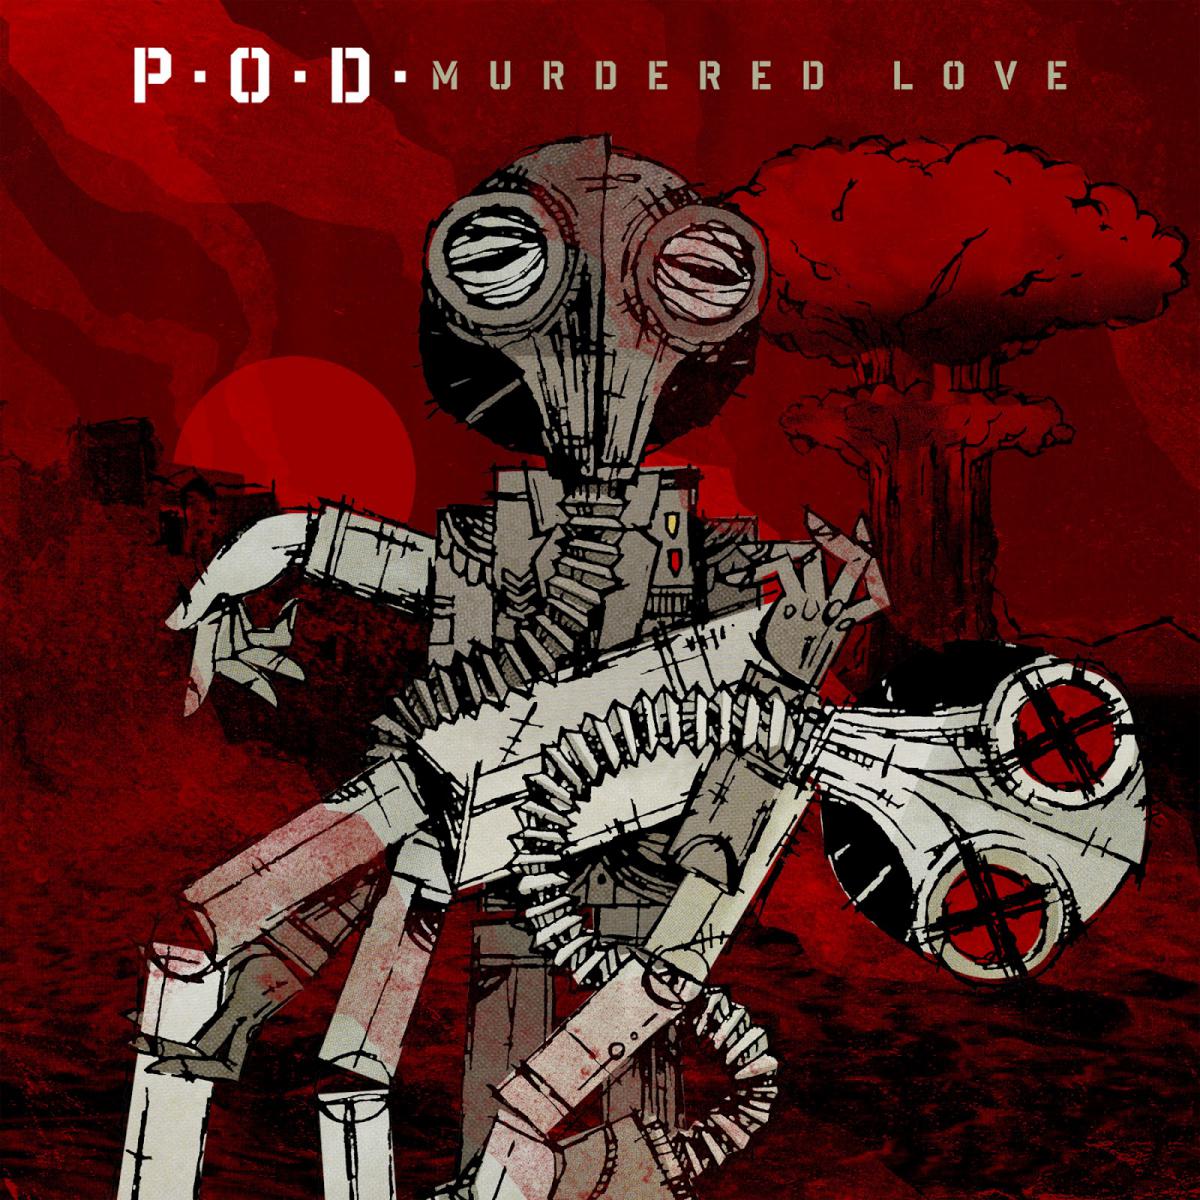 P.O.D. - Murdered Love<br />
